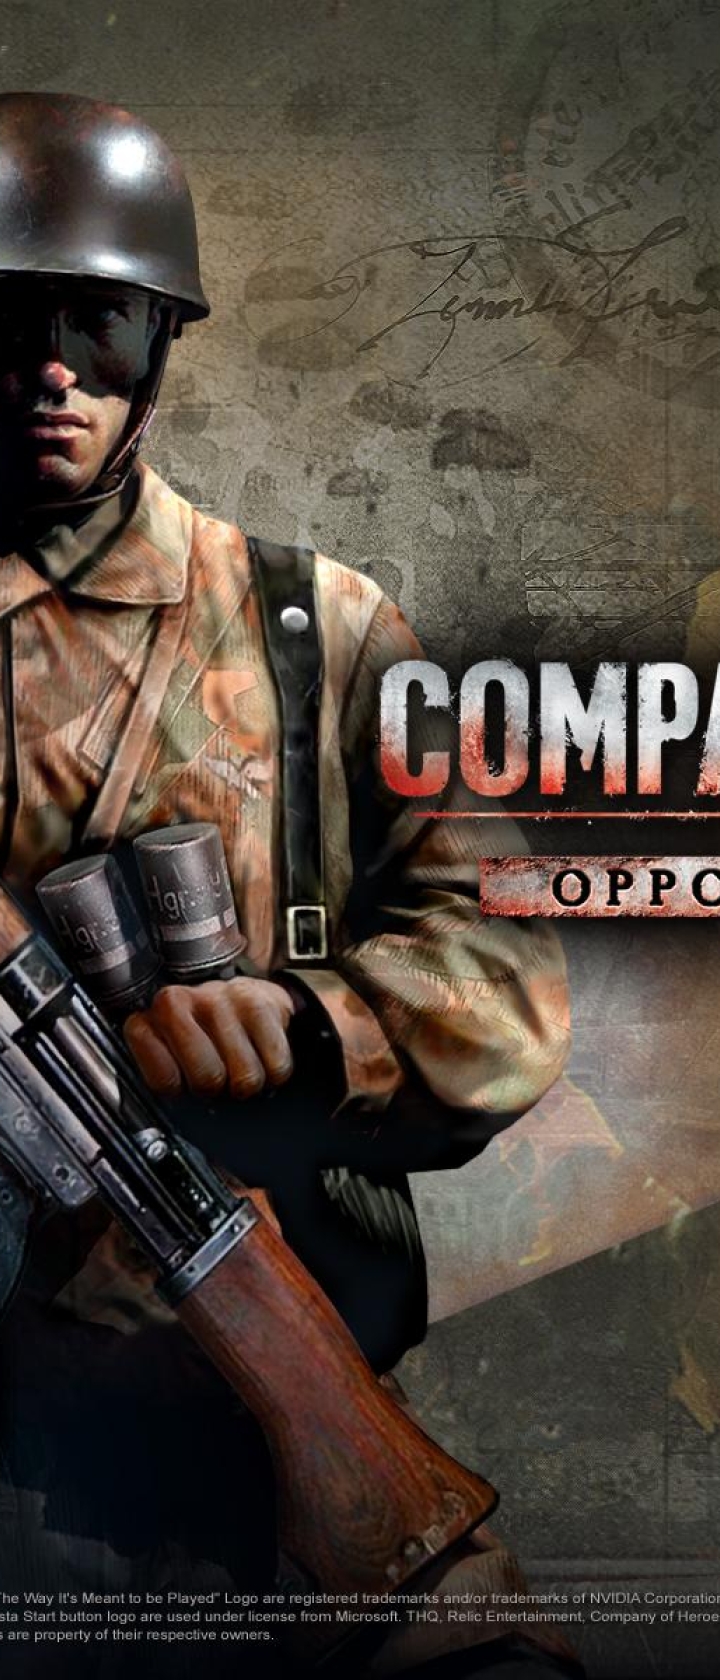 iphone x company of heroes 2